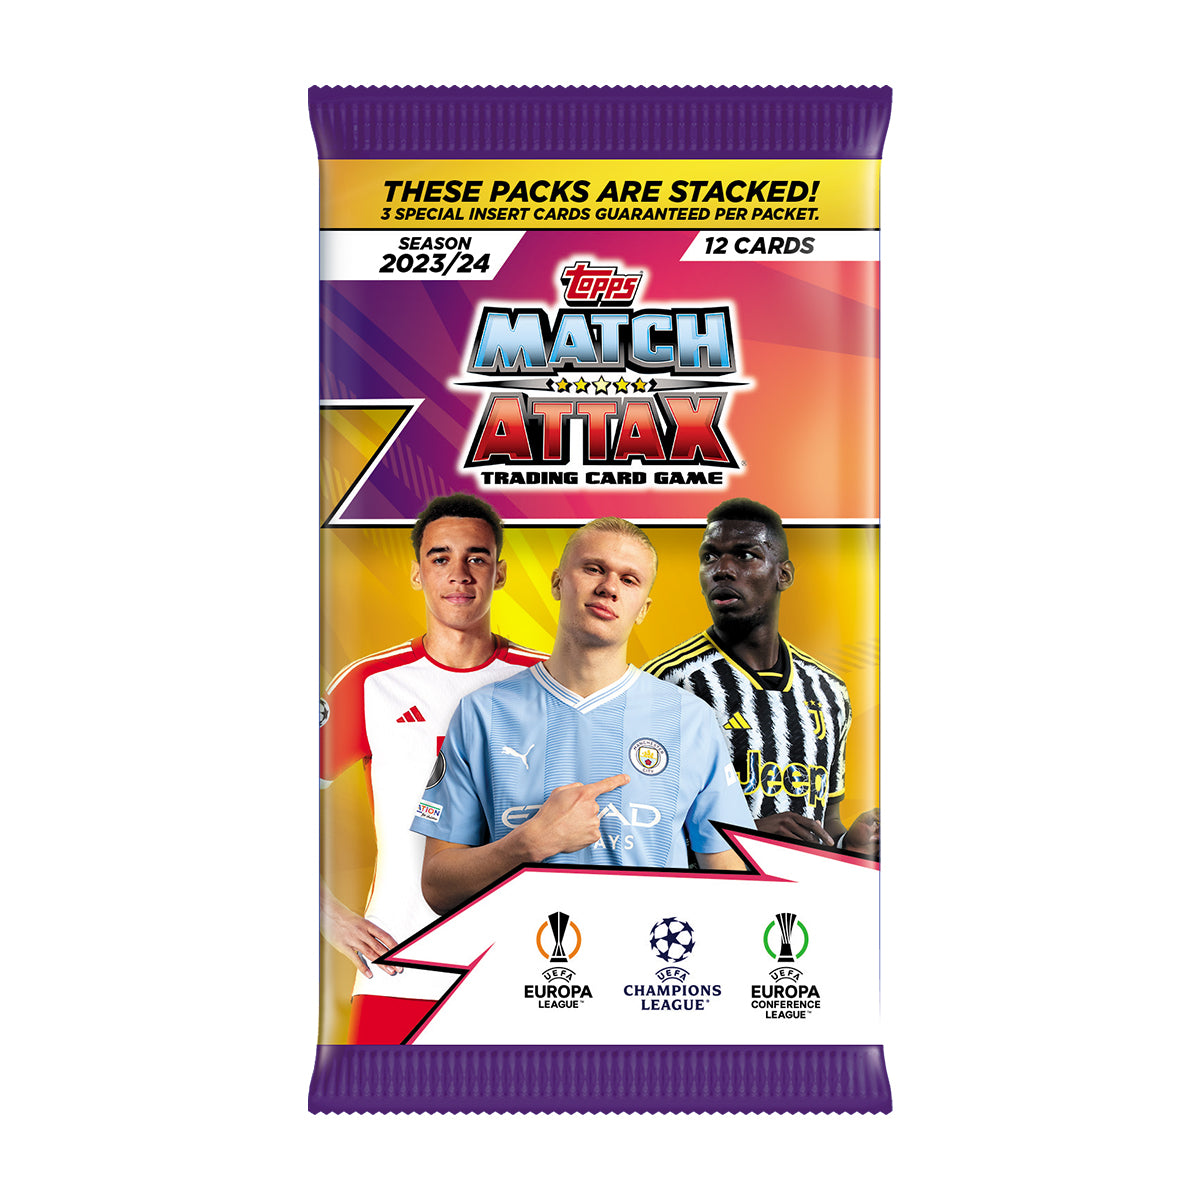 2023-24 TOPPS MATCH ATTAX UEFA CHAMPIONS LEAGUE CARDS - ECO BLASTER (48 CARDS + 3 LE) (IN STOCK OCT 21)